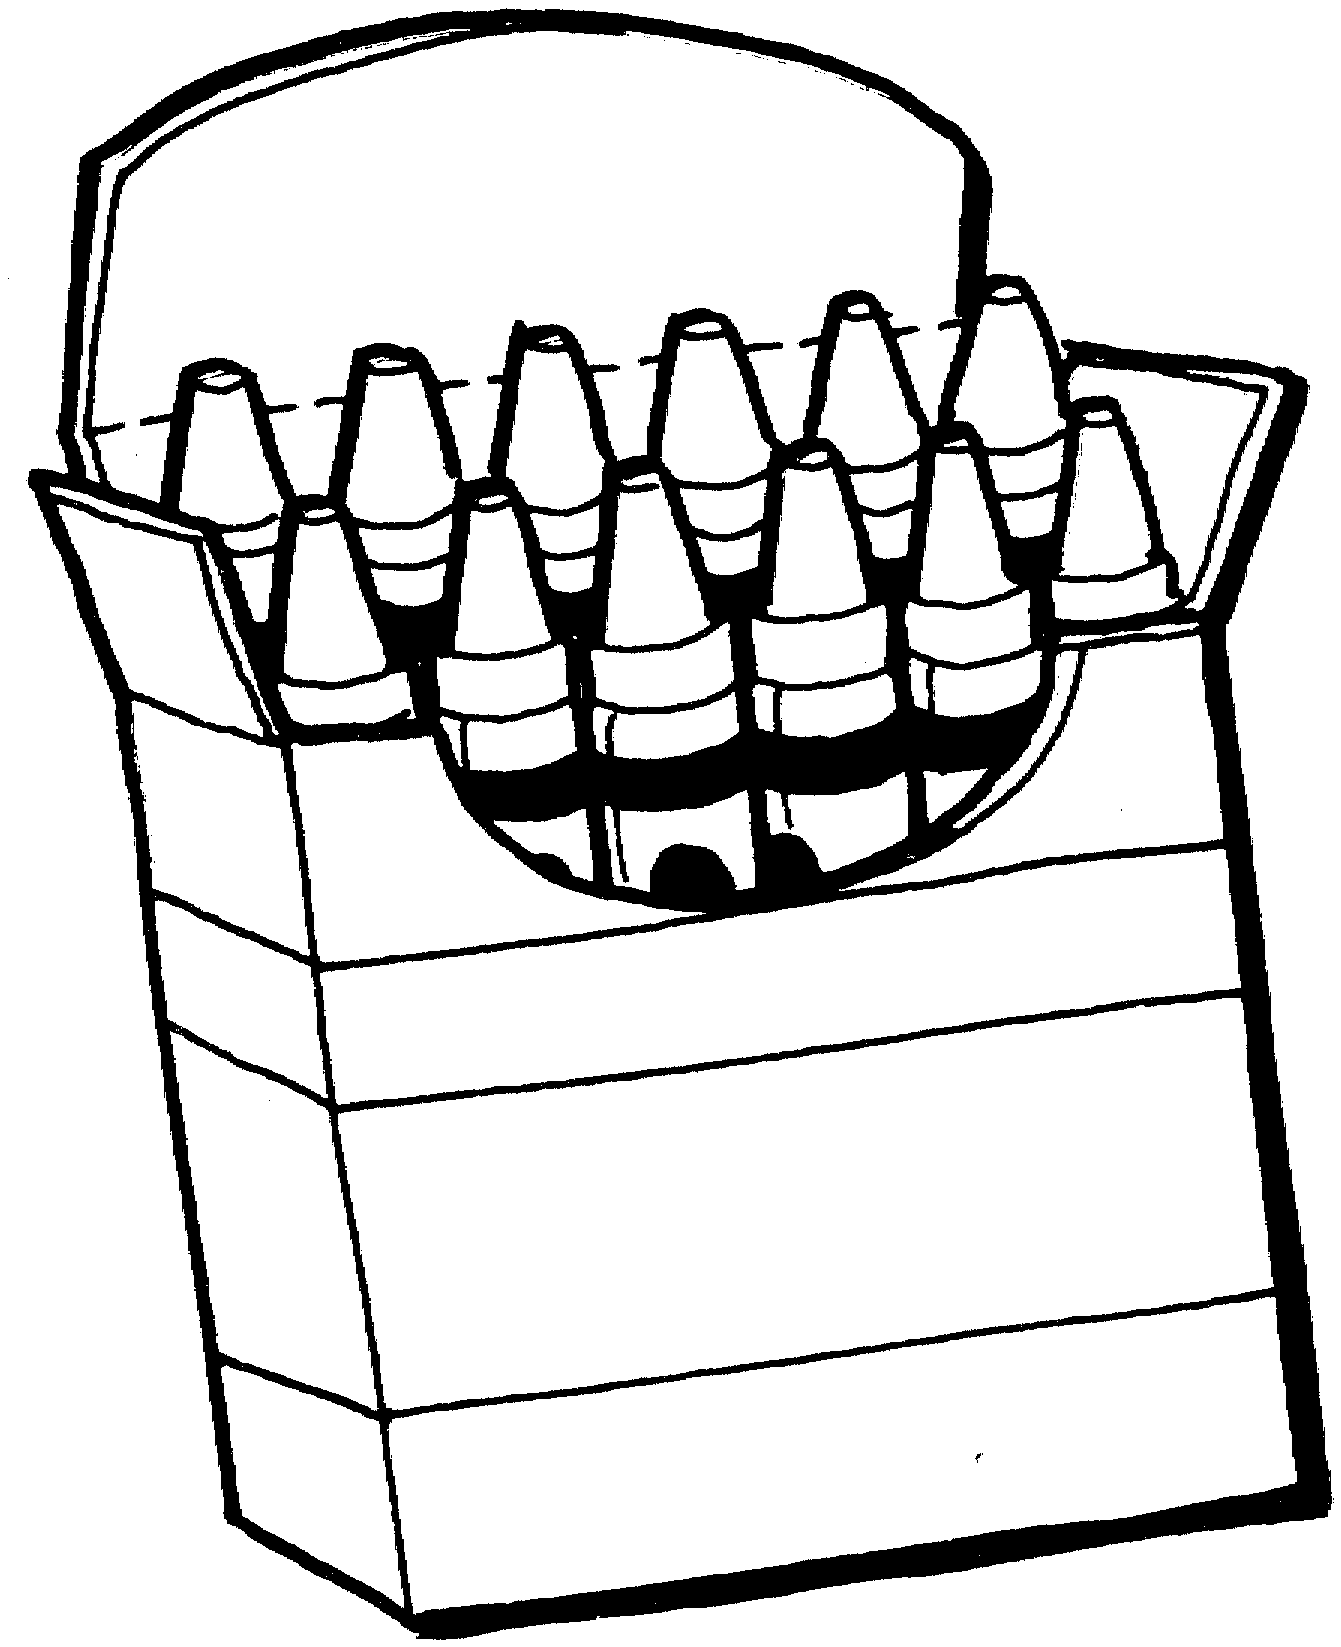 Colored Pencils Clipart Black And White